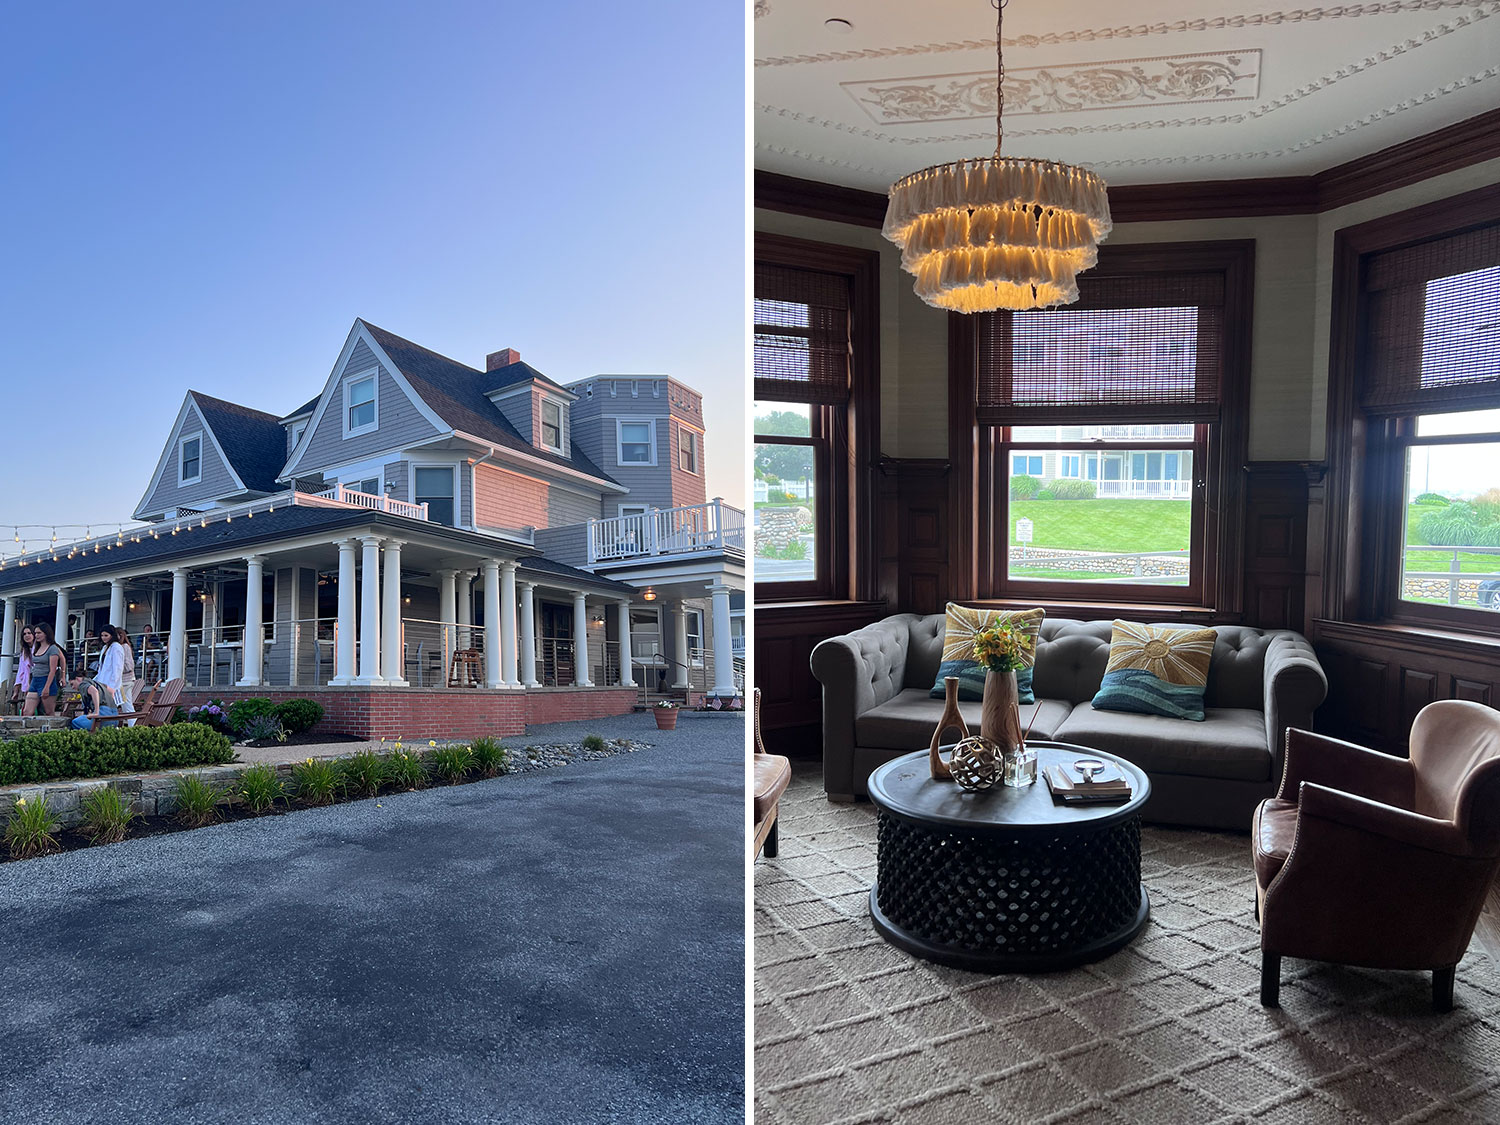 Exterior and interior view of The Shore House hotel in Rhode Island